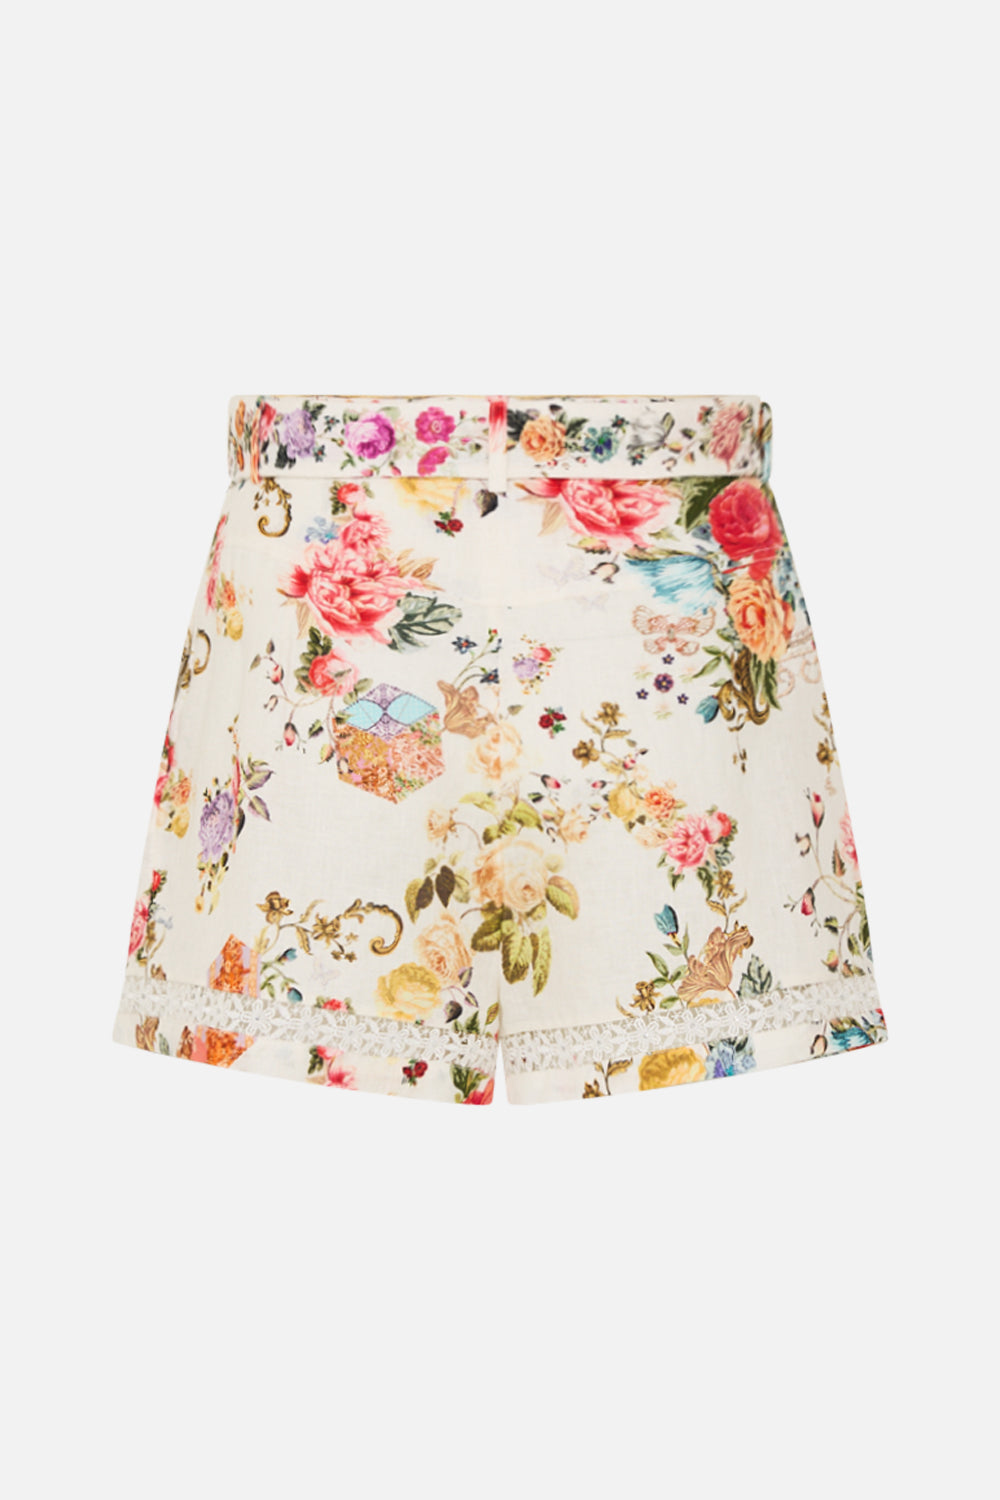 Sew Yesterday - High Waisted Shorts with Lace Insert